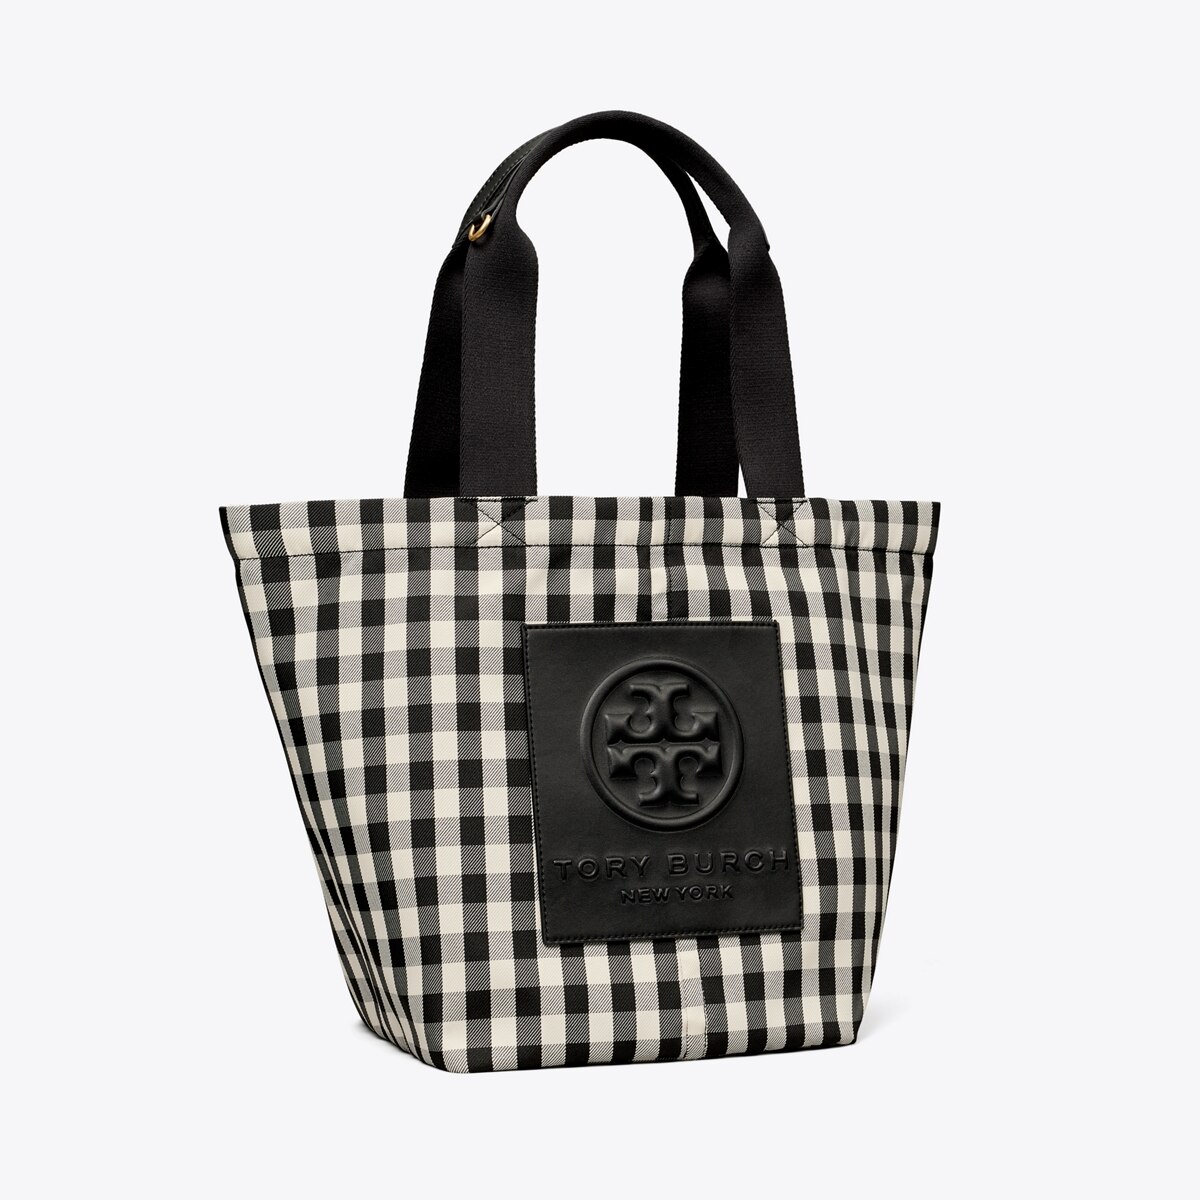 Introducir 112+ imagen tory burch piper gingham small square tote bag